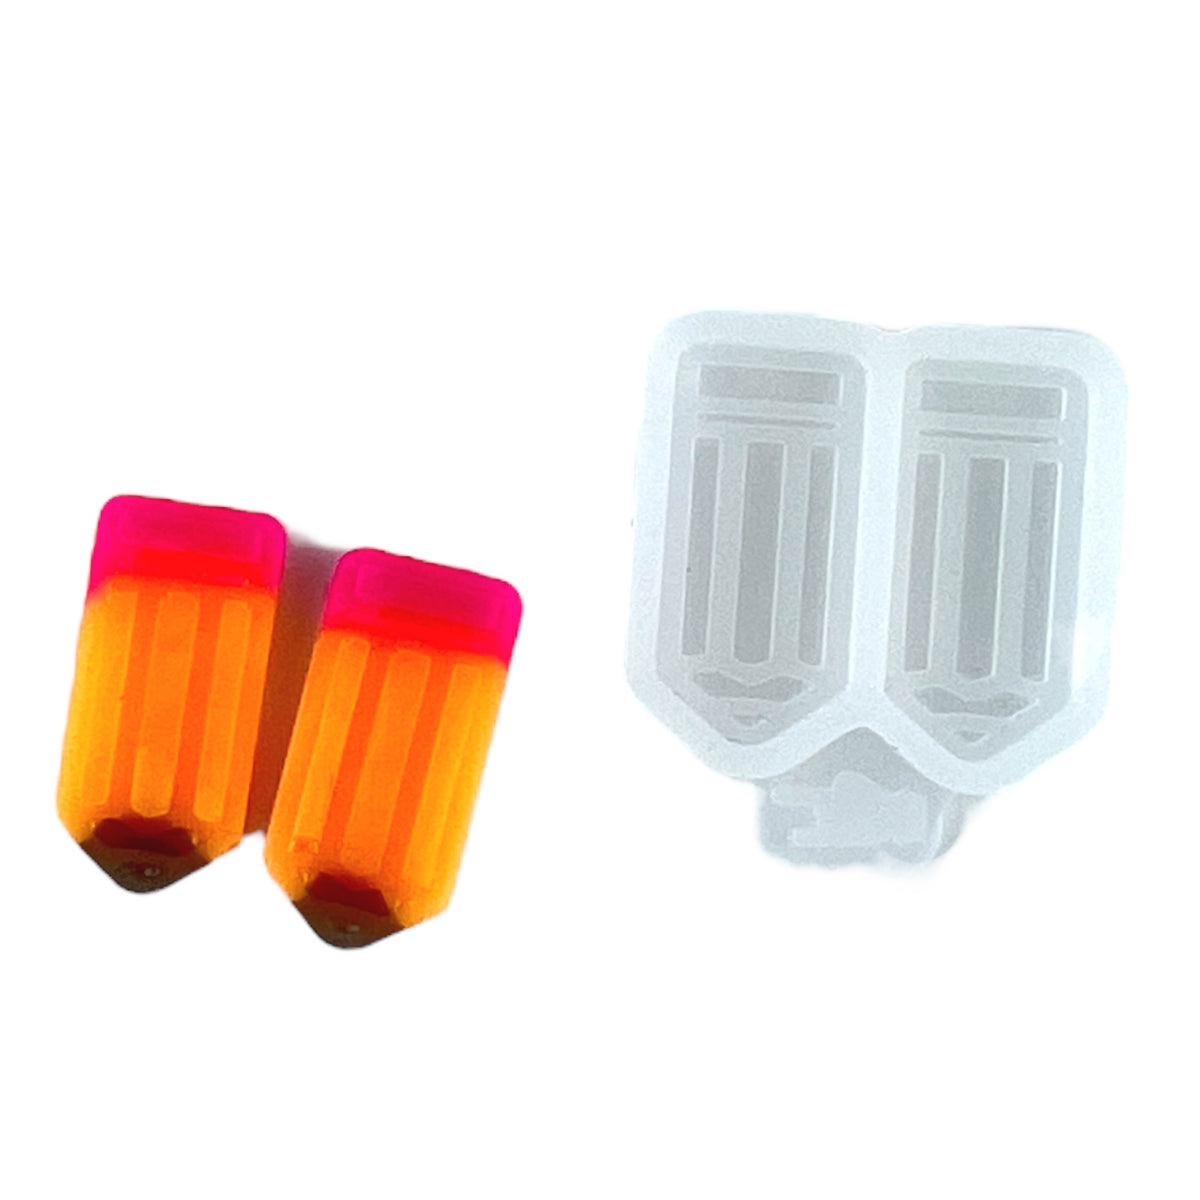 Tiny Pencil Resin Rockers Exclusive Stud Earring Mold for UV and Epoxy Resin